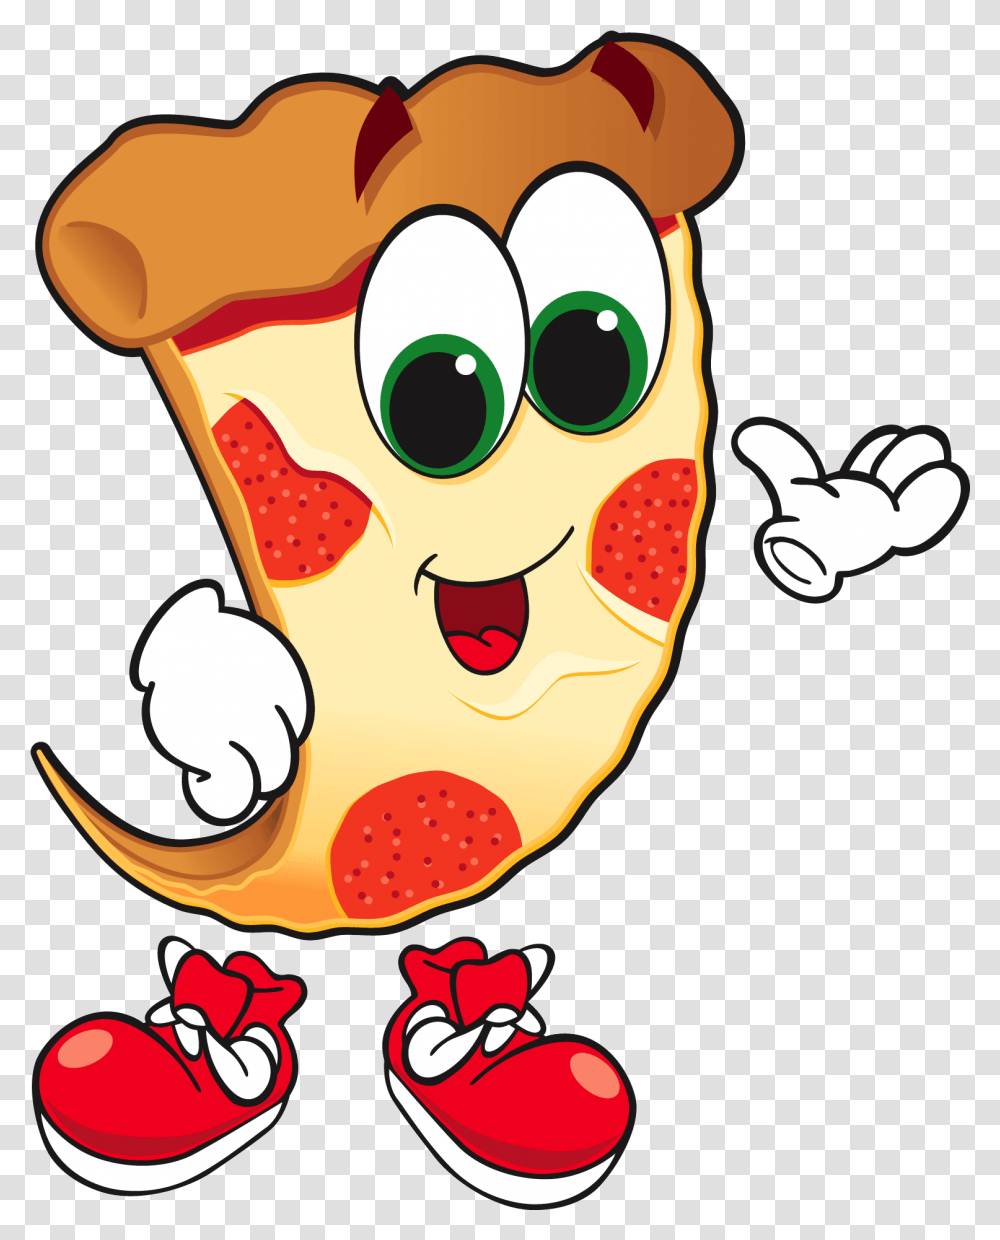 Pizza Slice Cartoon For Kids Animated Pictures Of Pizza Cartoon Pizza Clipart, Food, Label, Text, Graphics Transparent Png